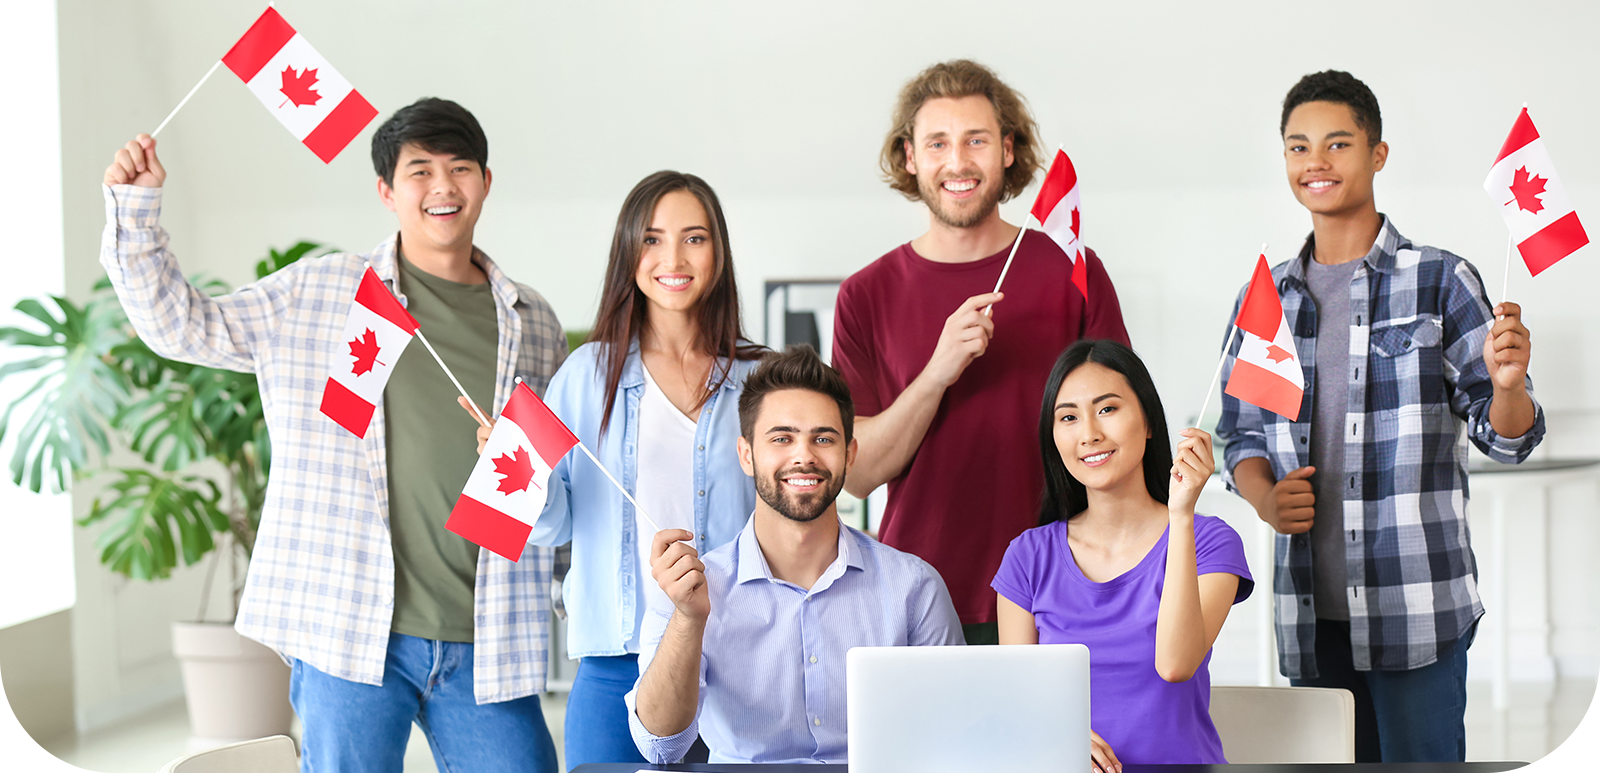 toronto-immigration-consulting-firm